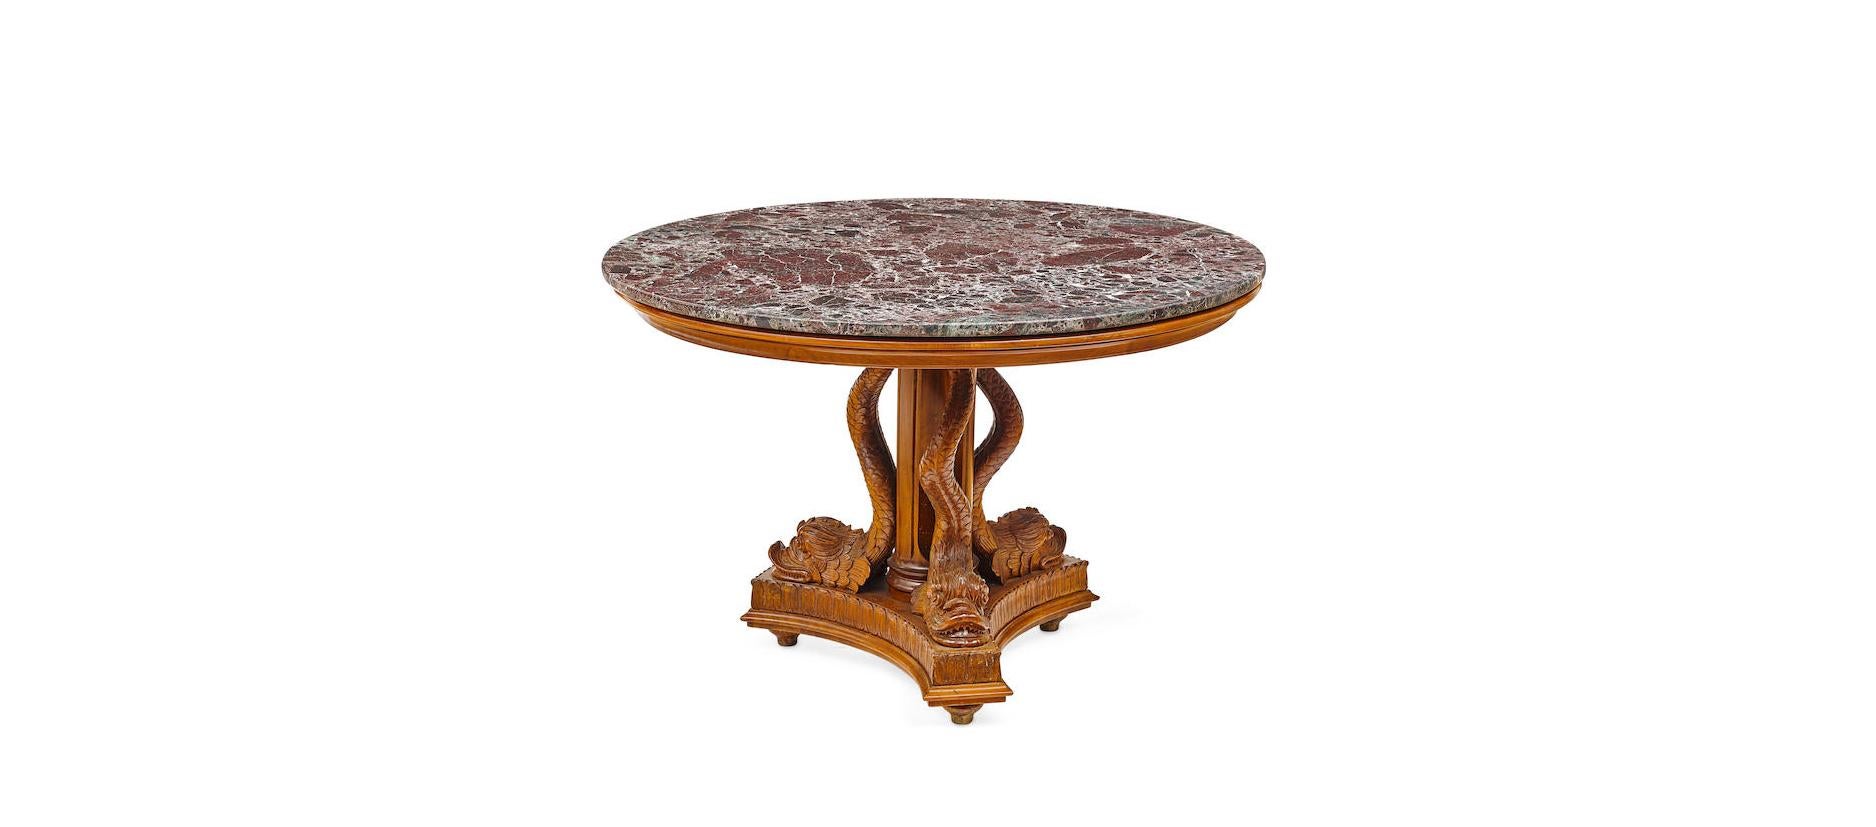 Italian Round Pedestal Table with Dolphins, Early 20th Century For Sale